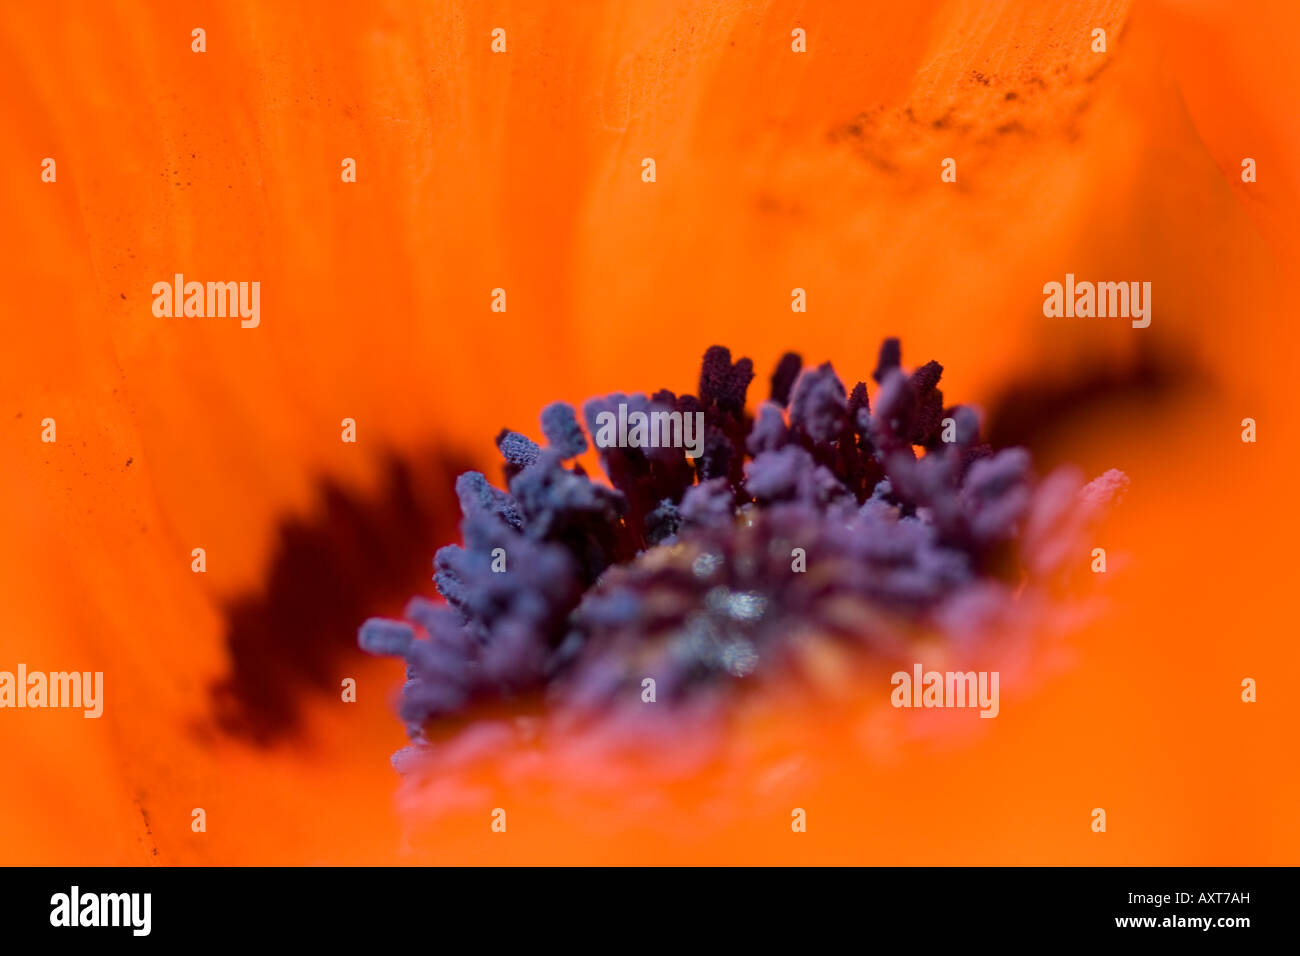 Macro of an brilliant orange poppy with purple stamens and scattered pollen. Stock Photo